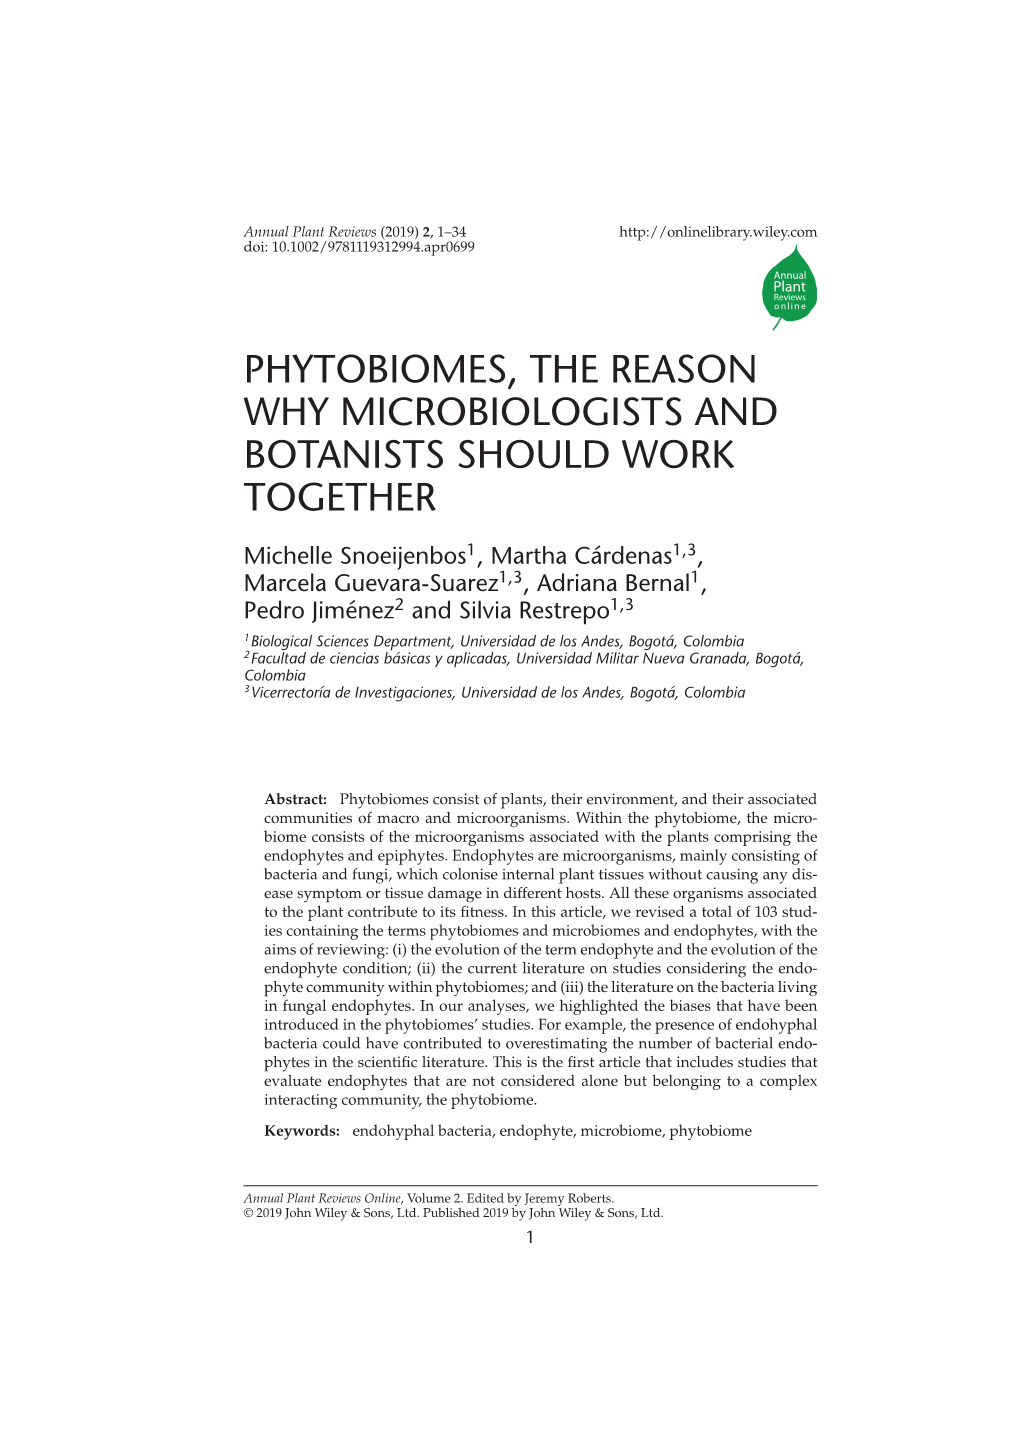 "Phytobiomes, the Reason Why Microbiologists and Botanists